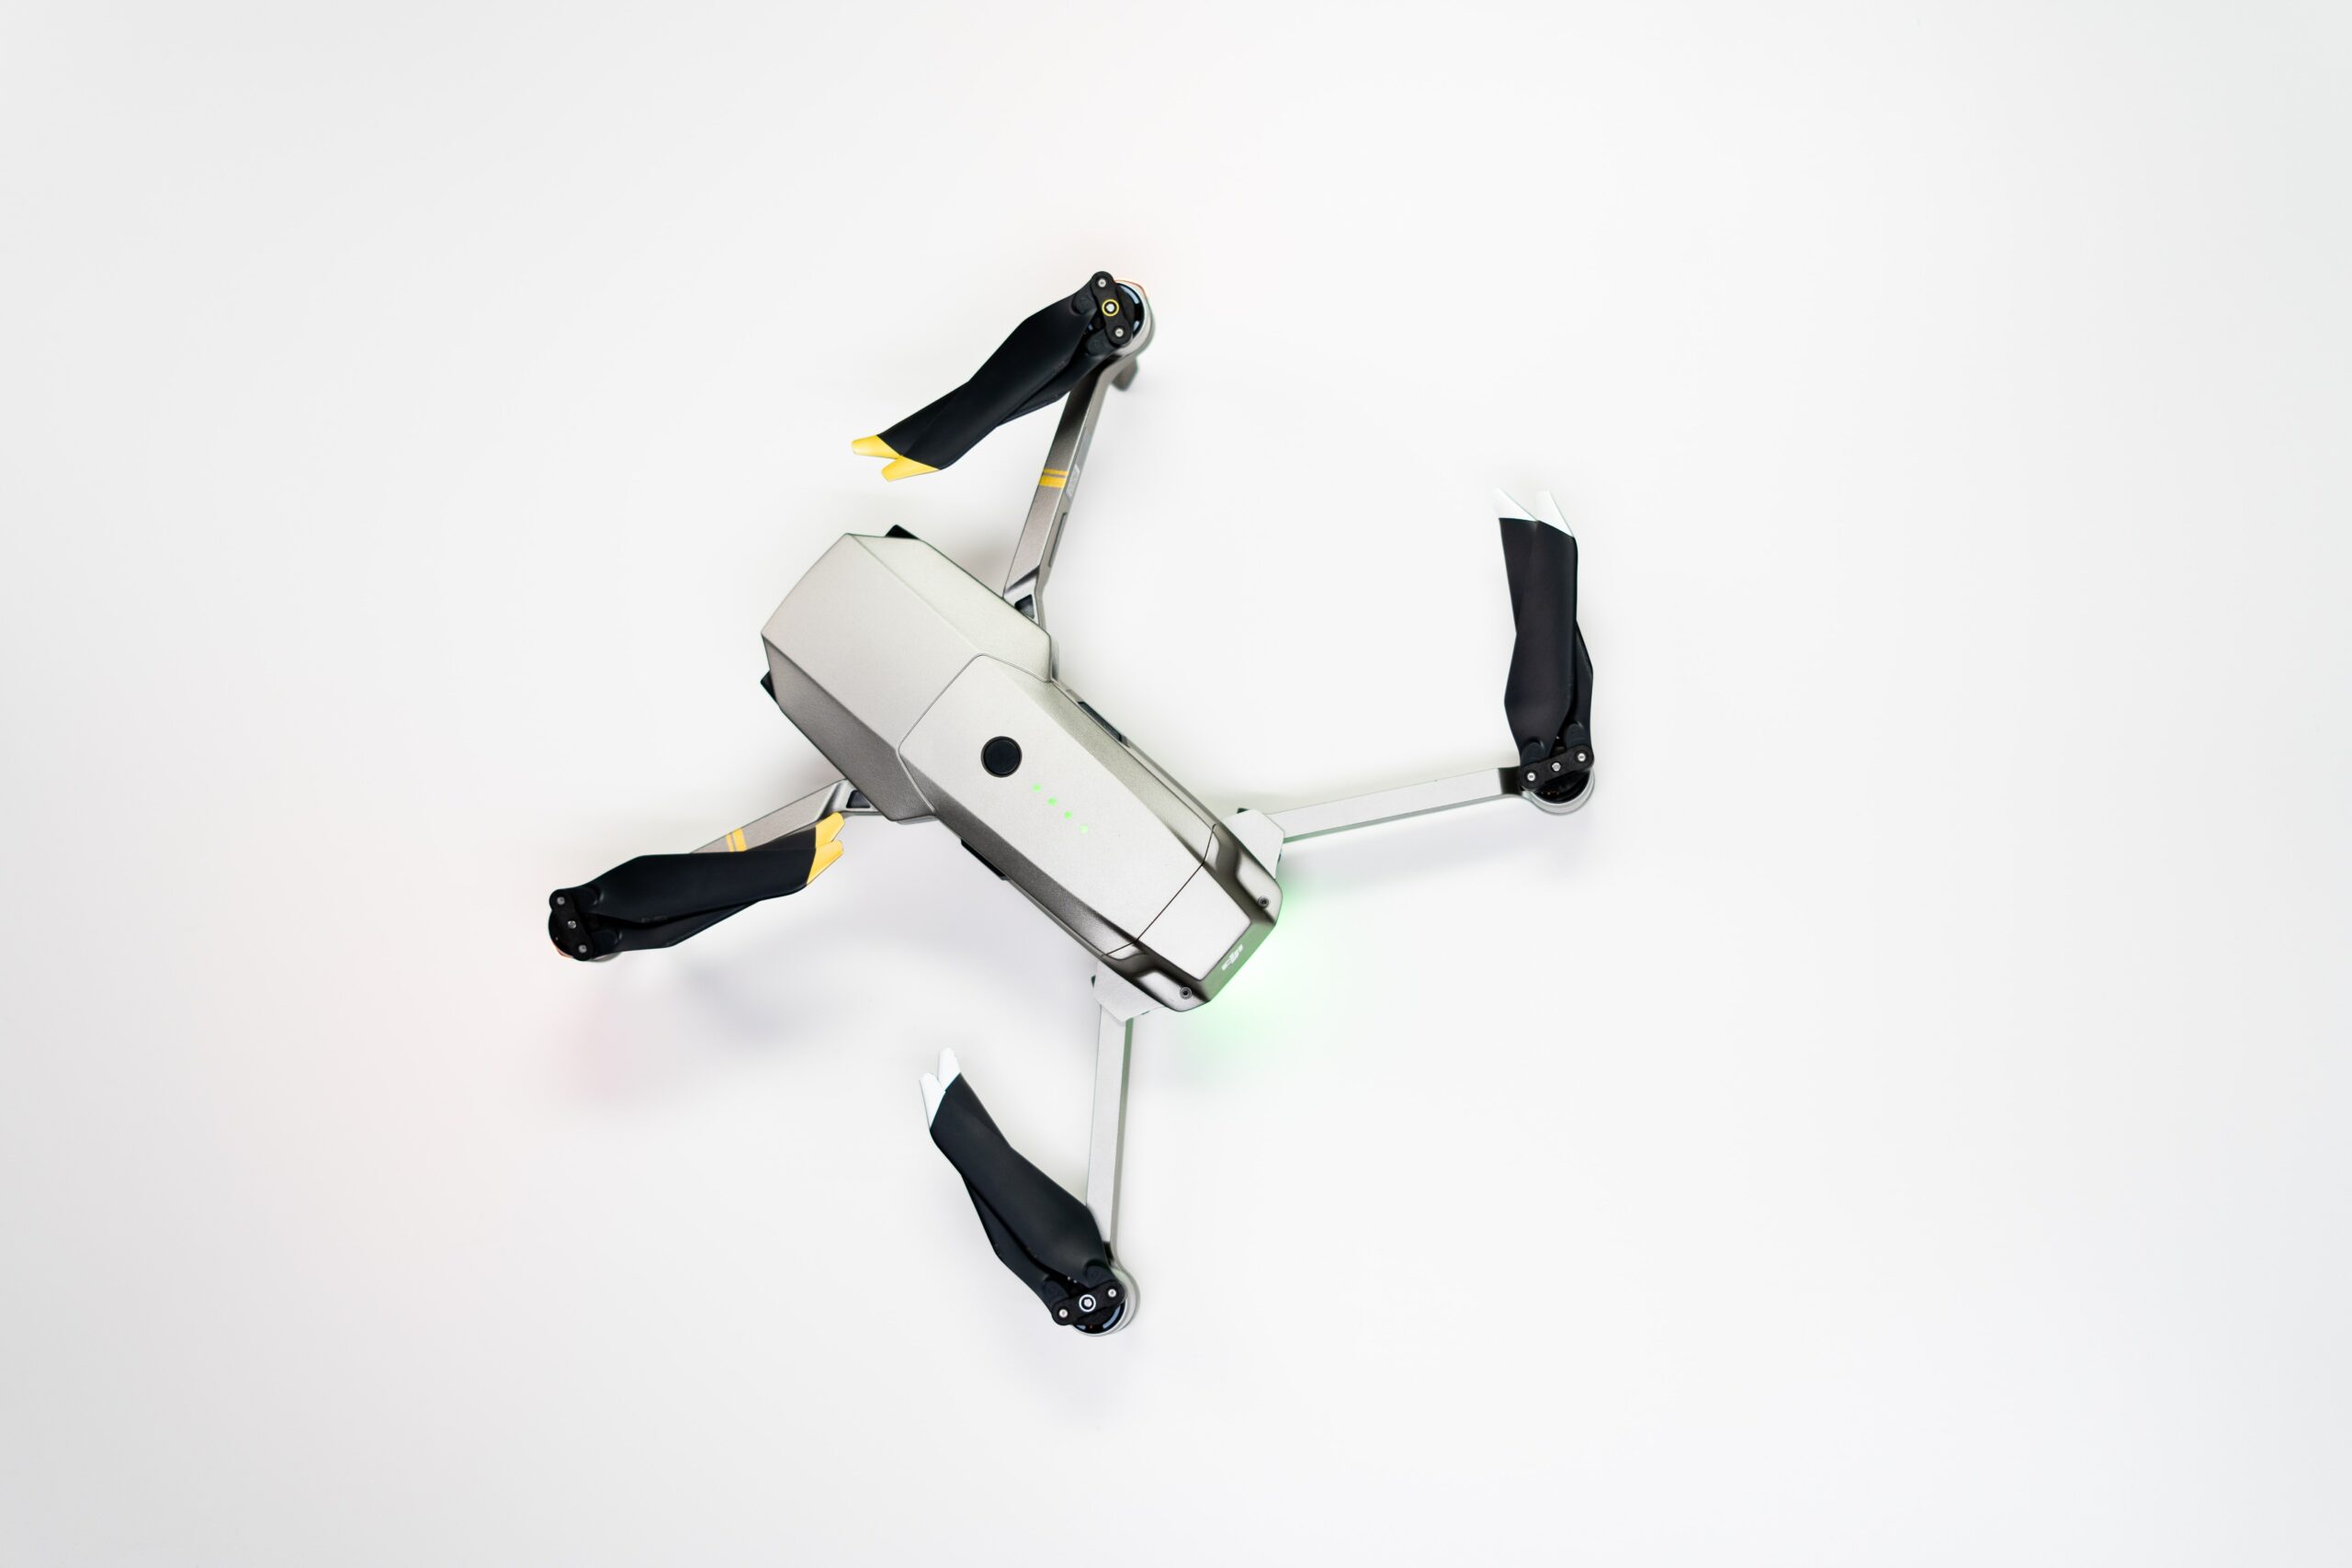 The newly regulated Level 5 drones qualification is ready for your learners!